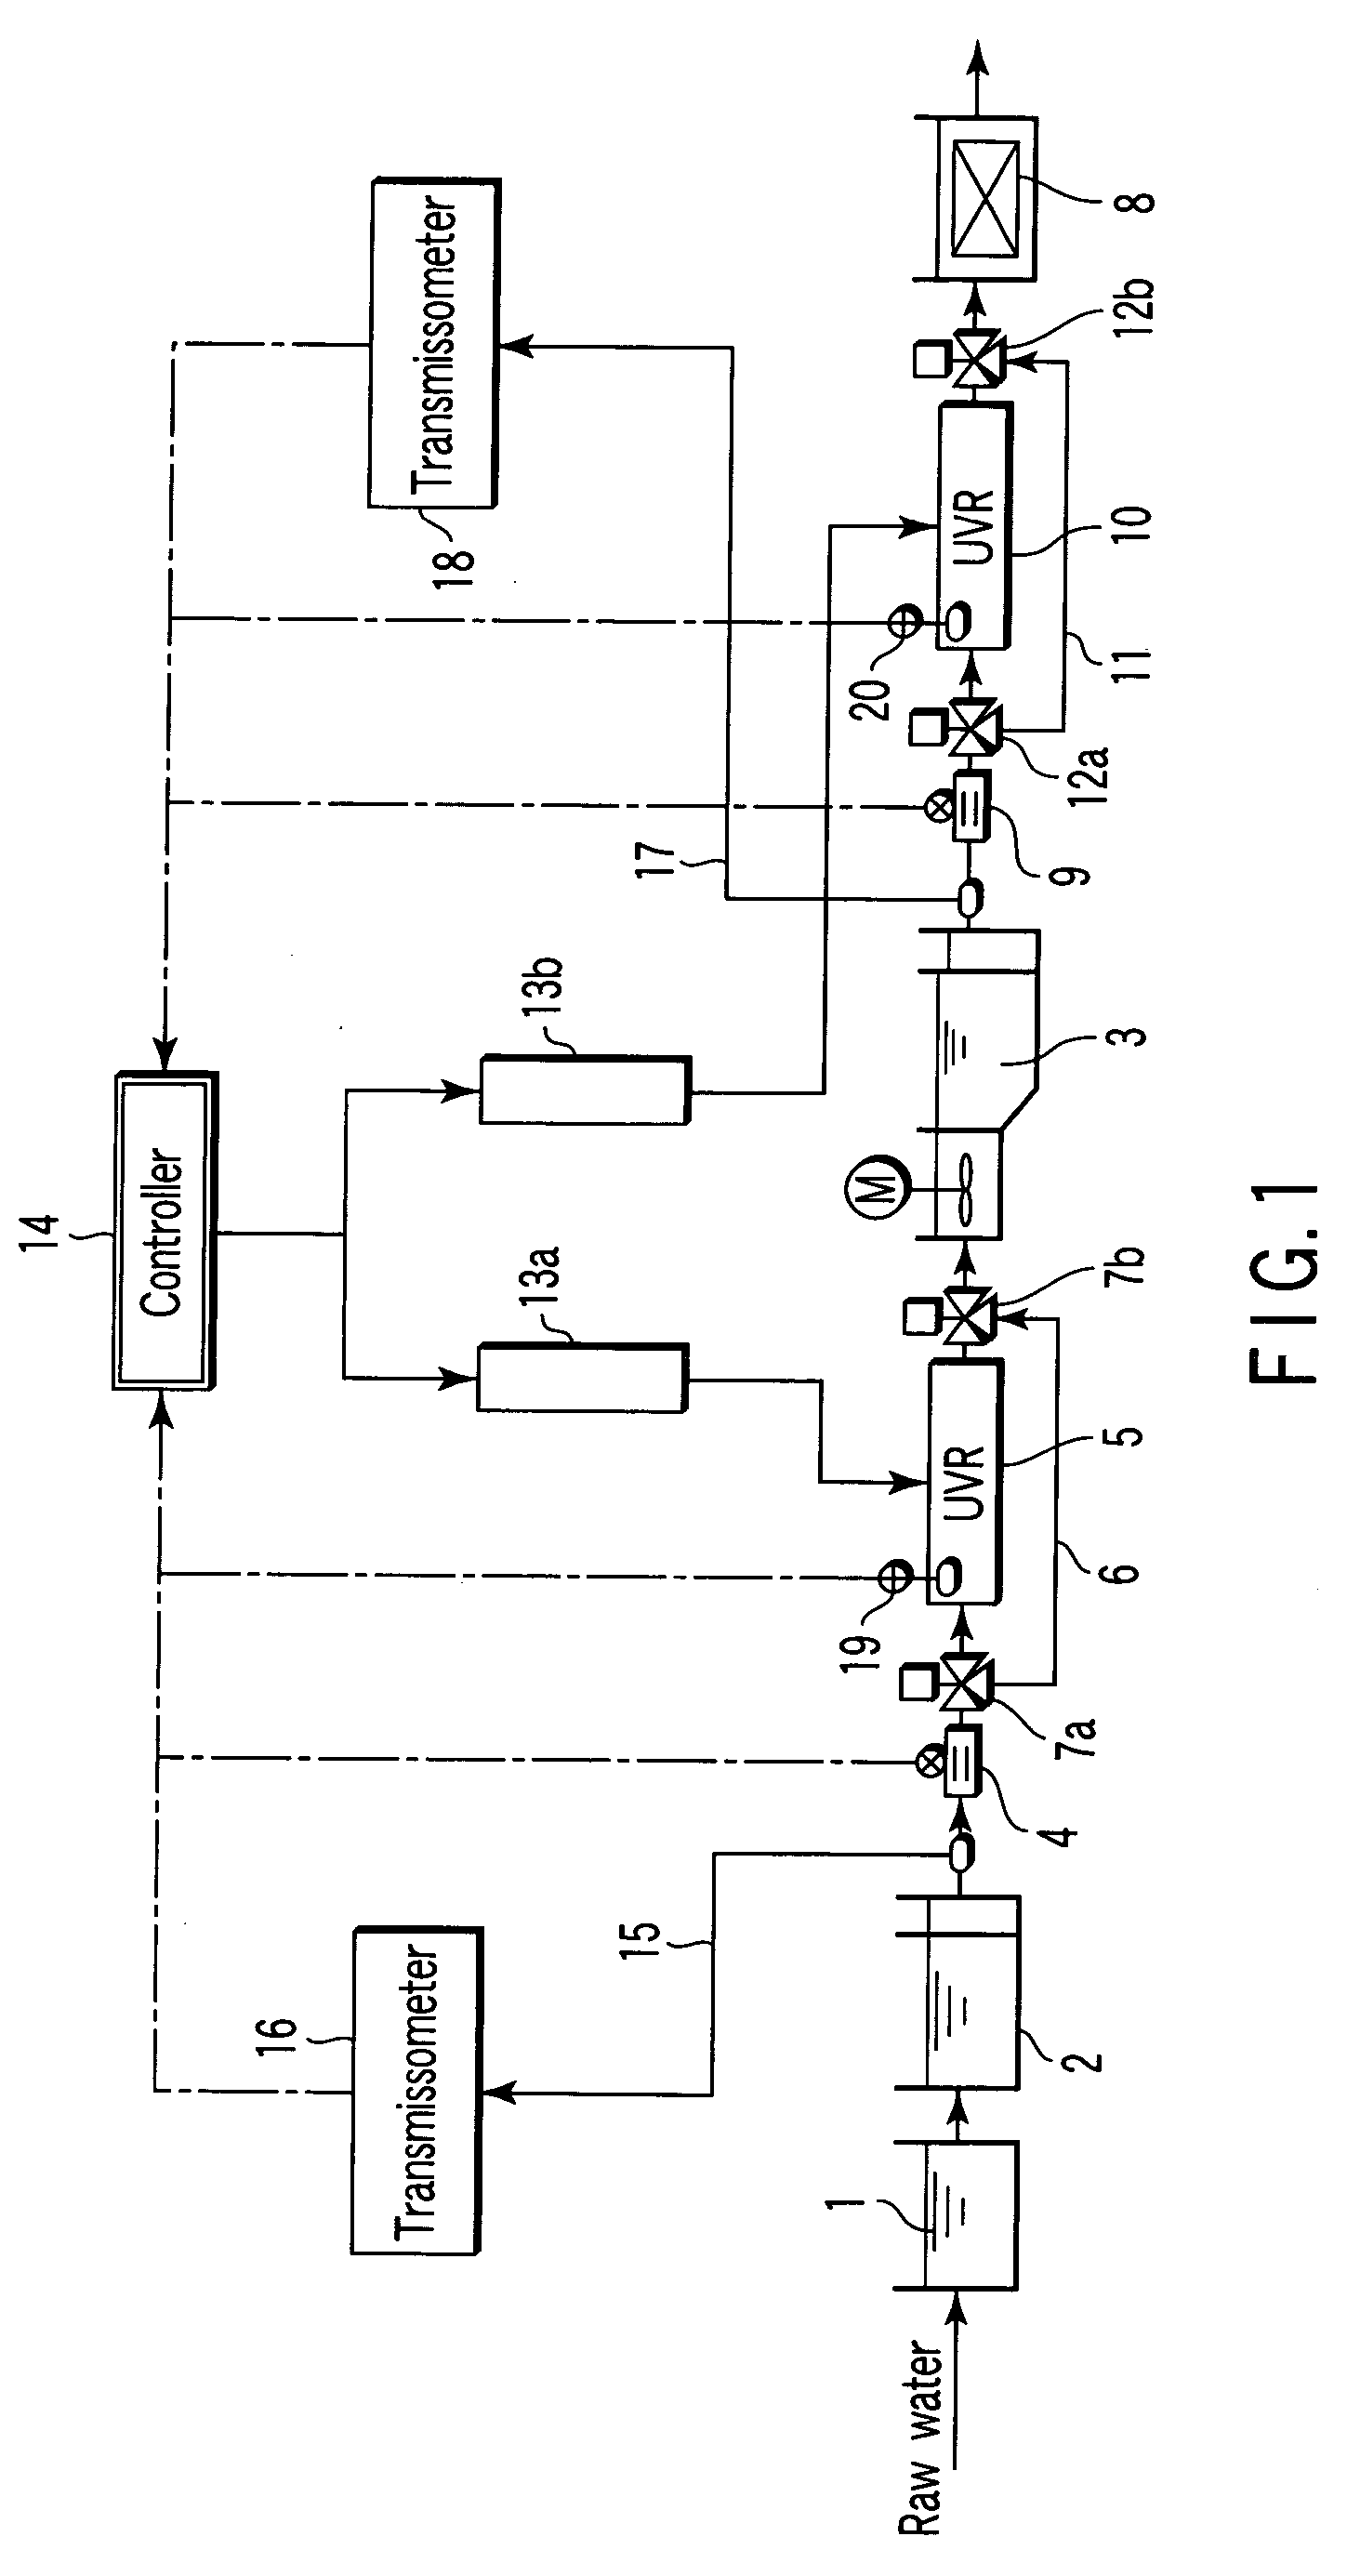 Ultraviolet radiation water treatment system